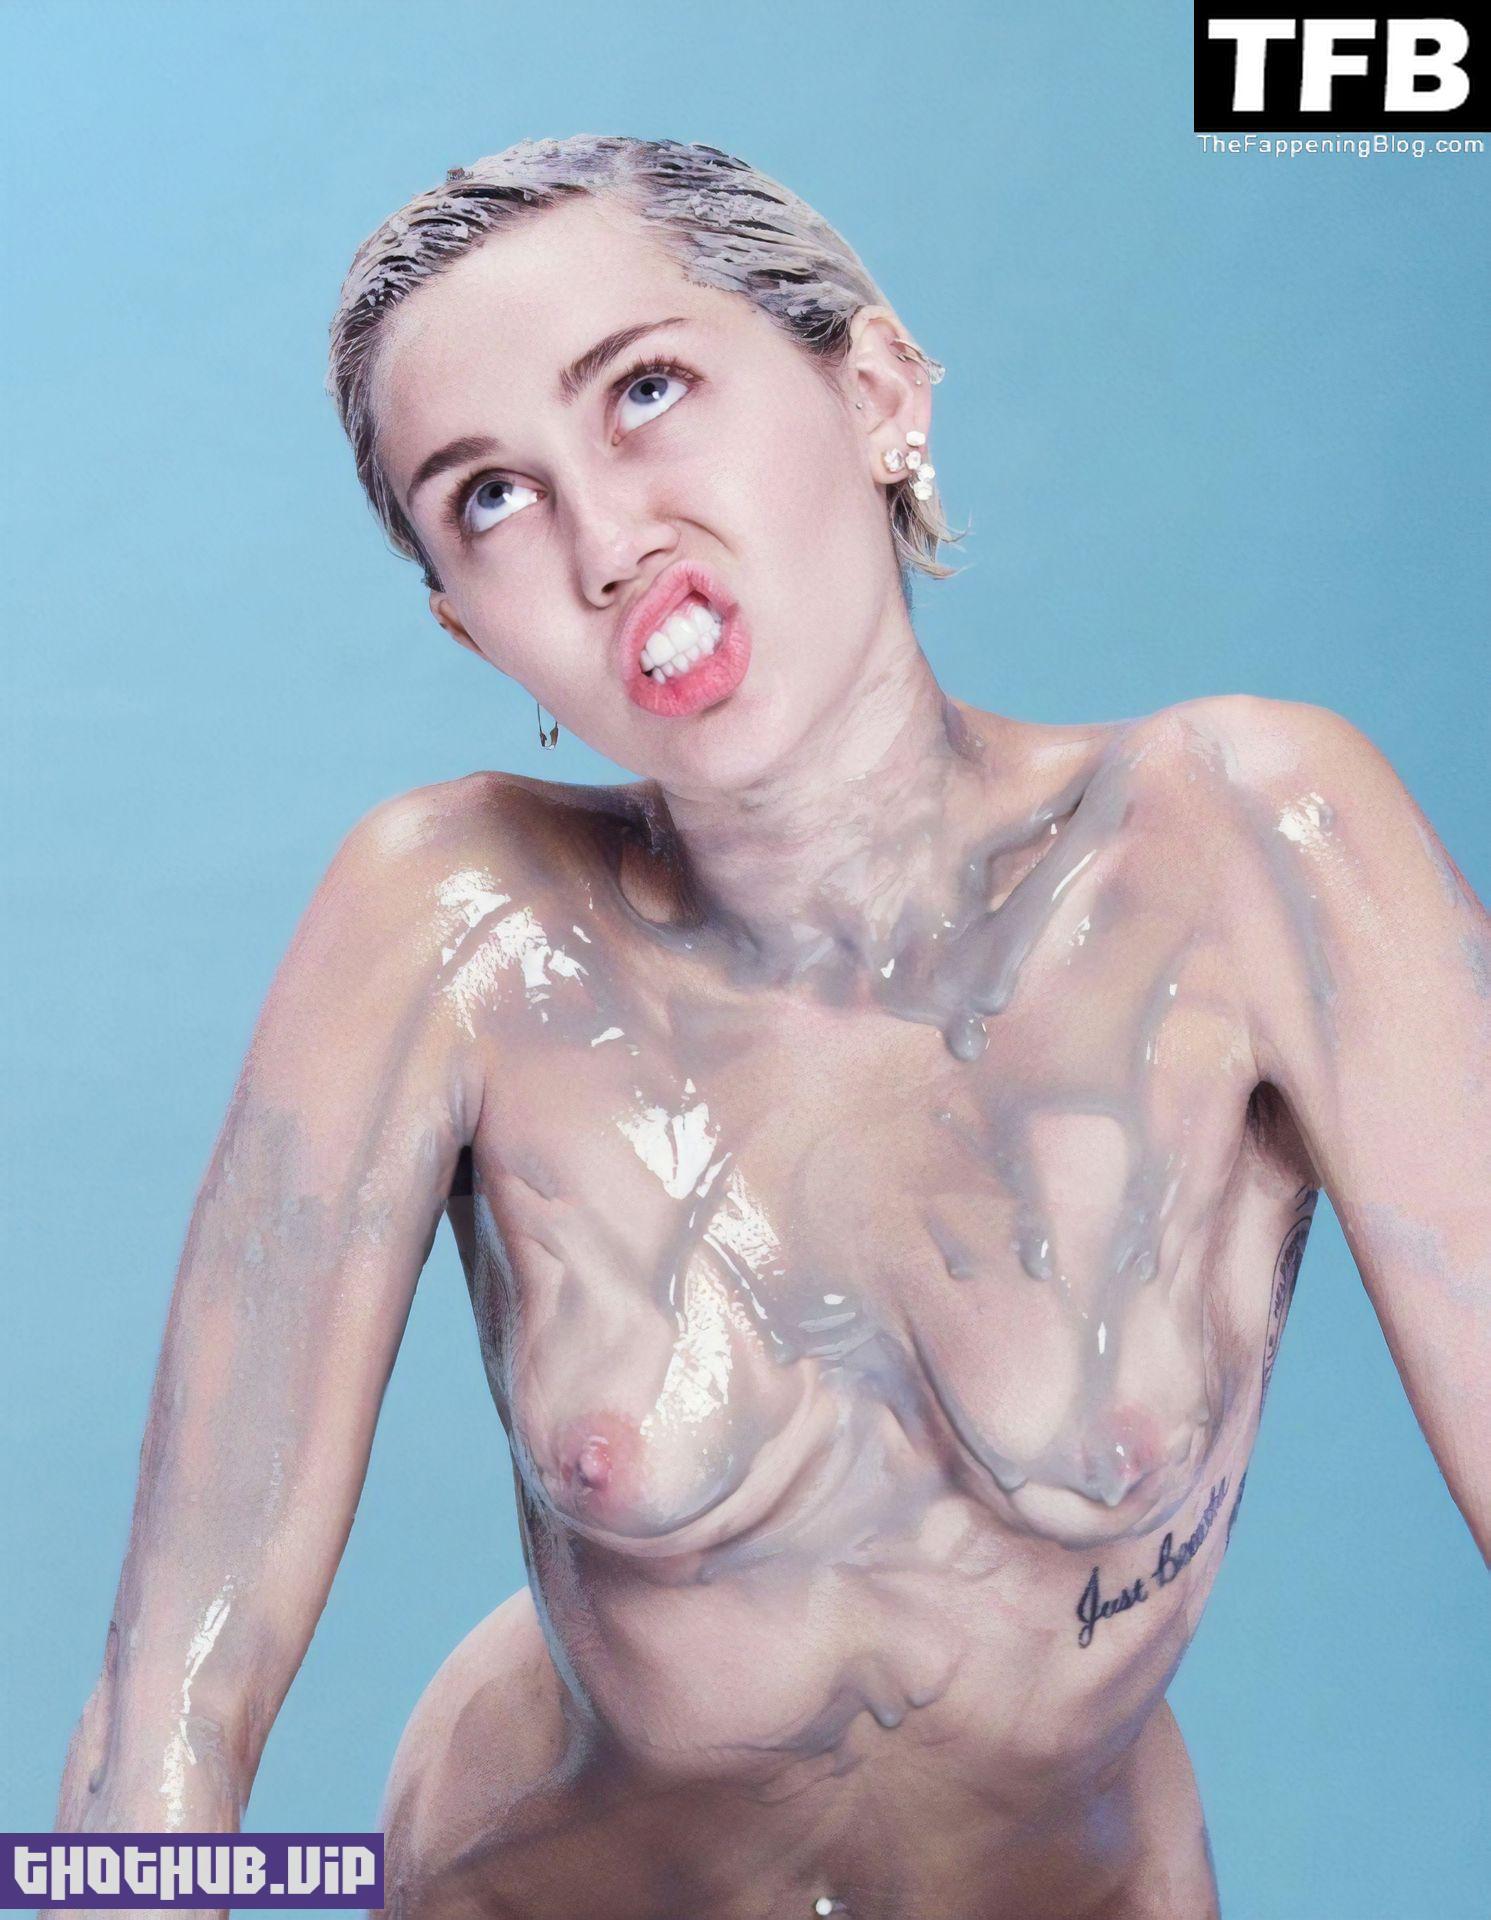 miley cyrus naked 47018 thefappeningblog.com